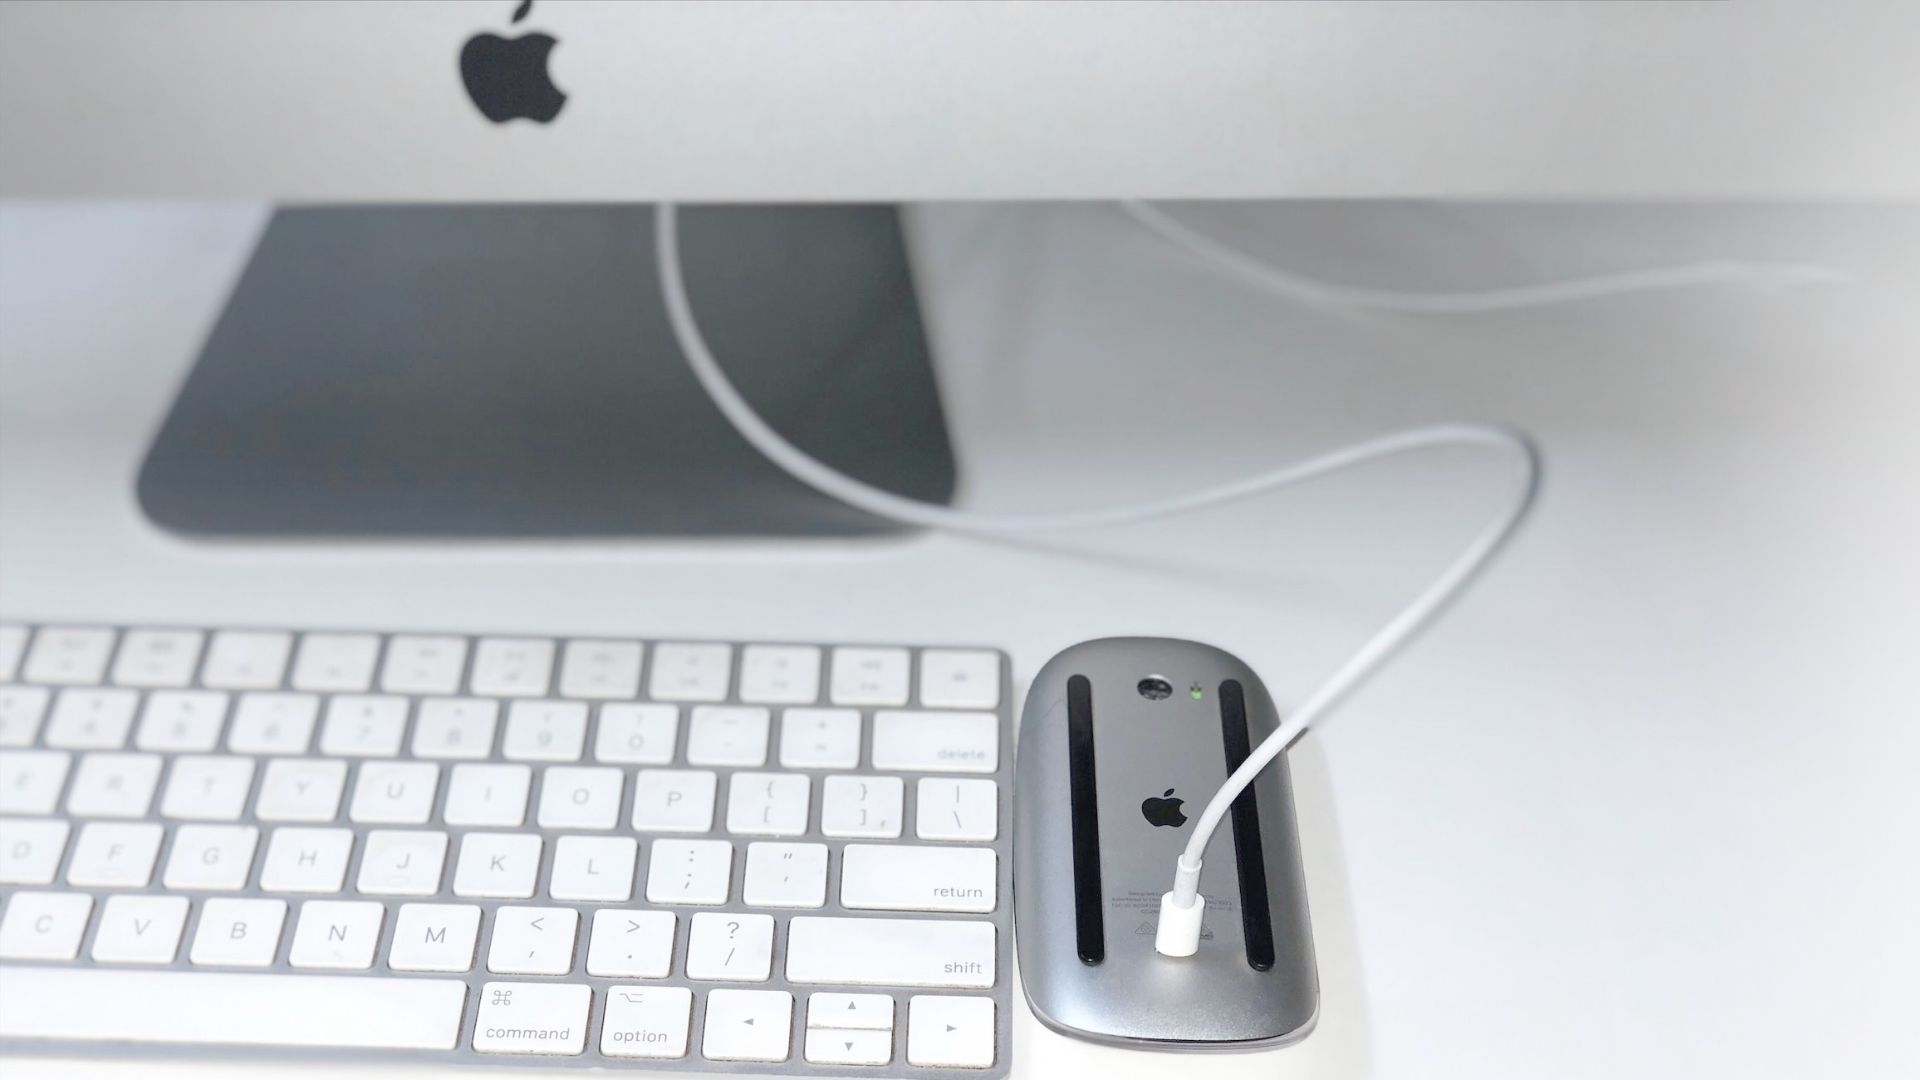 Step-by-step guide on how to connect Magic Mouse to Mac 01